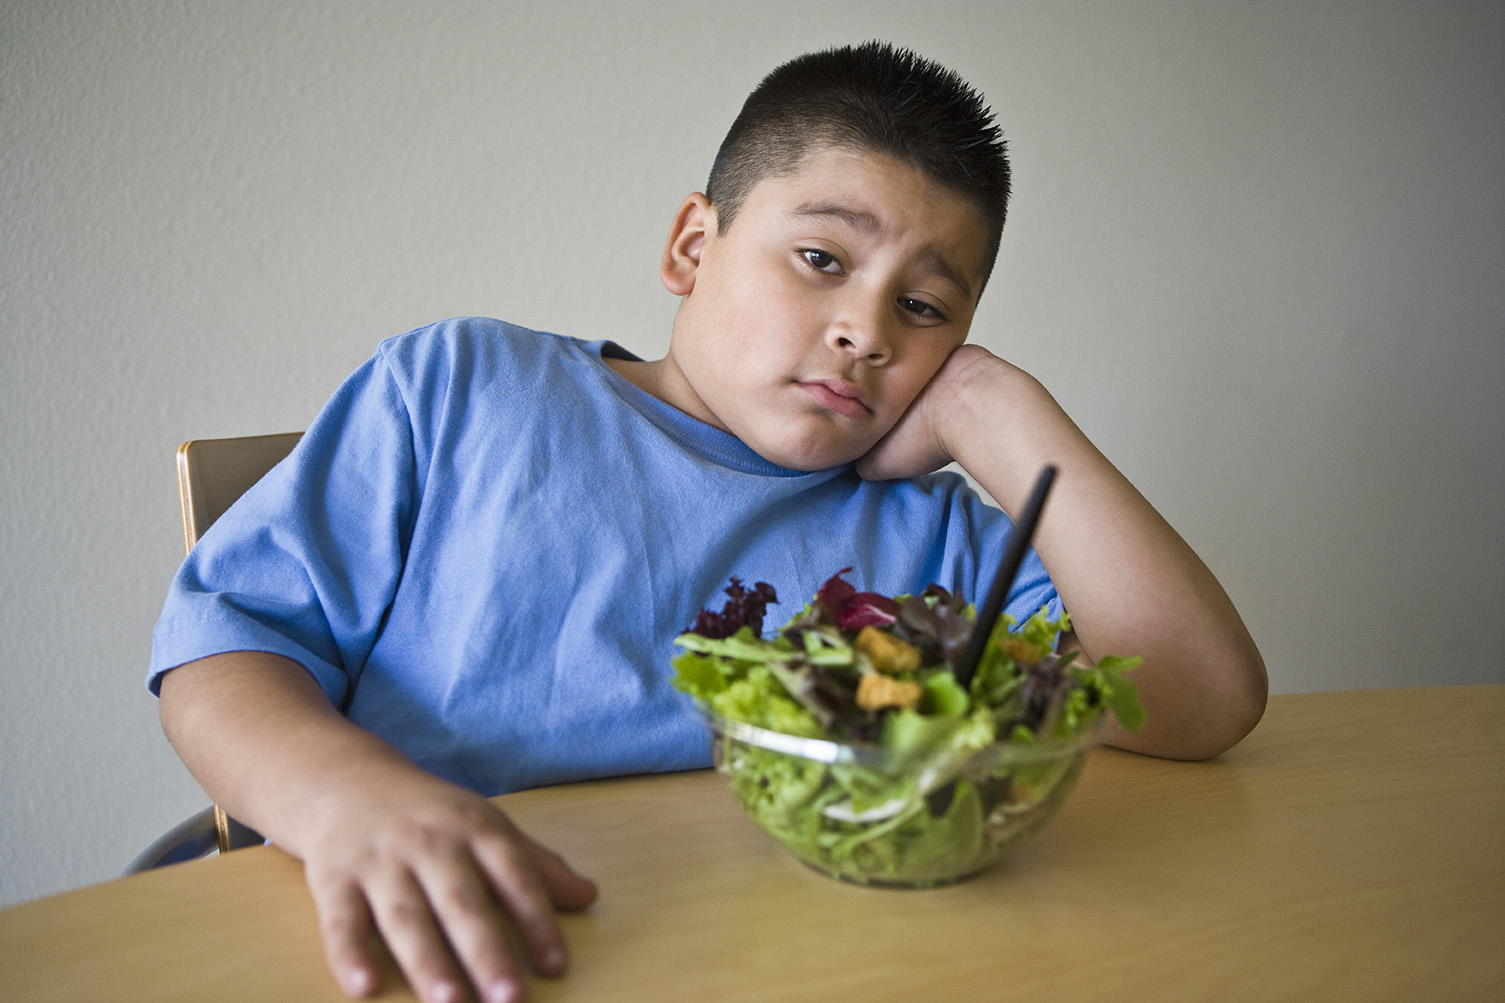 Pre-teen (10-12) boy sitting at desk with salad